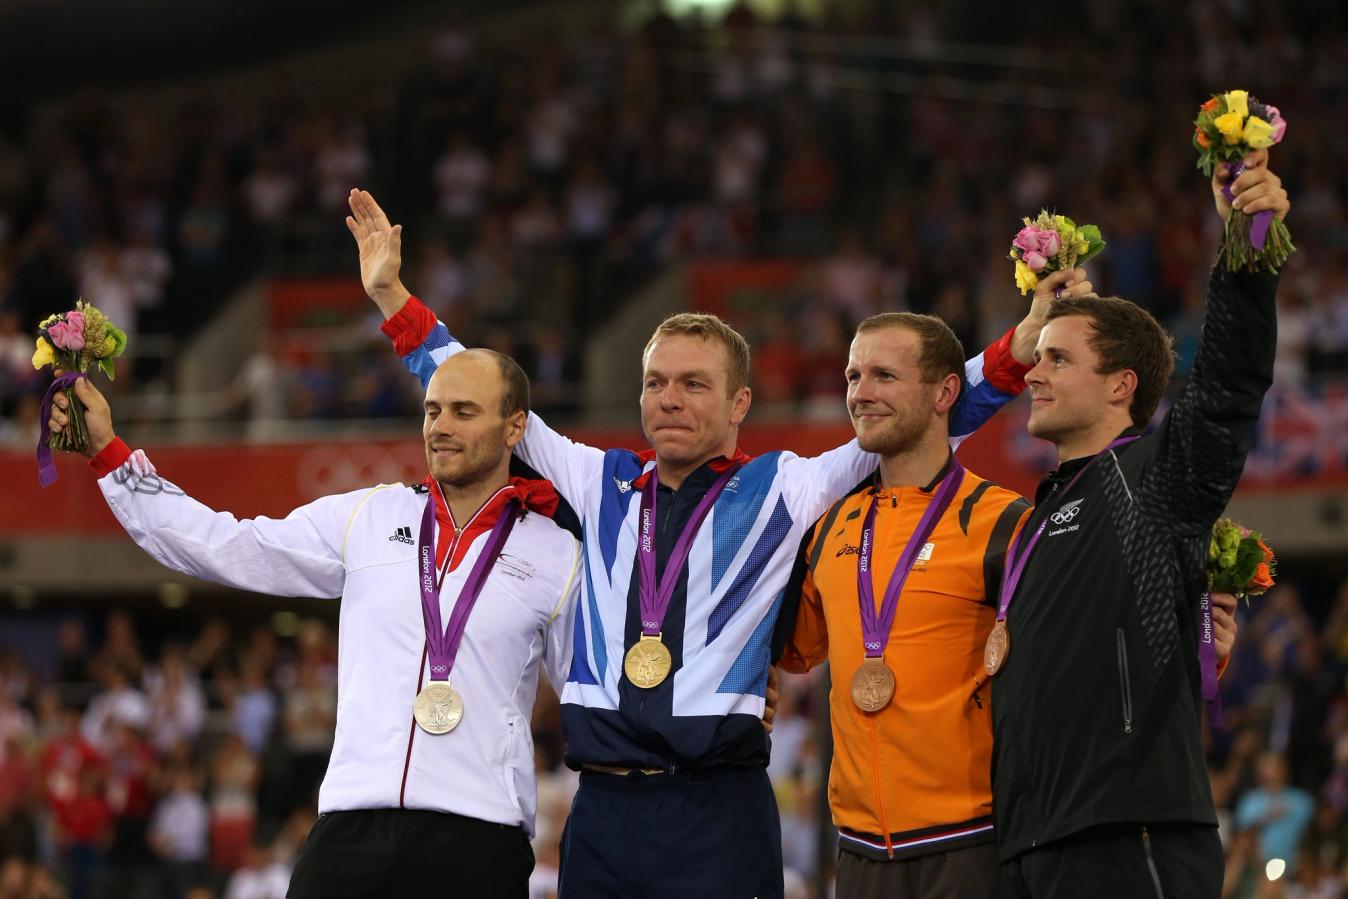 Chris Hoy victorious at the London 2012 Olympics